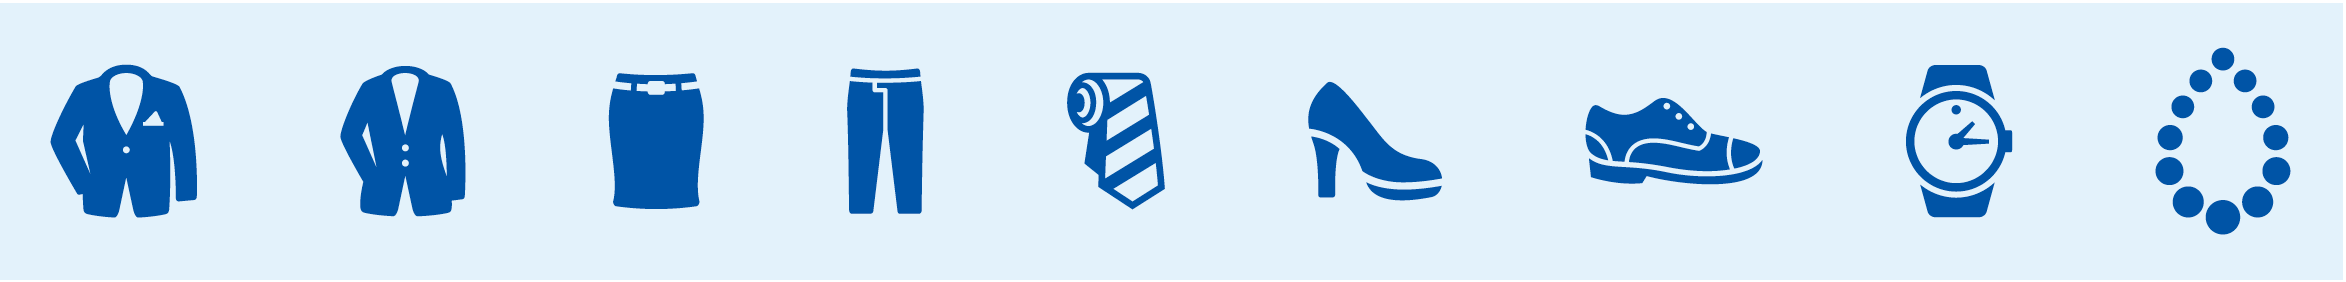 Formal Business Attire Icons